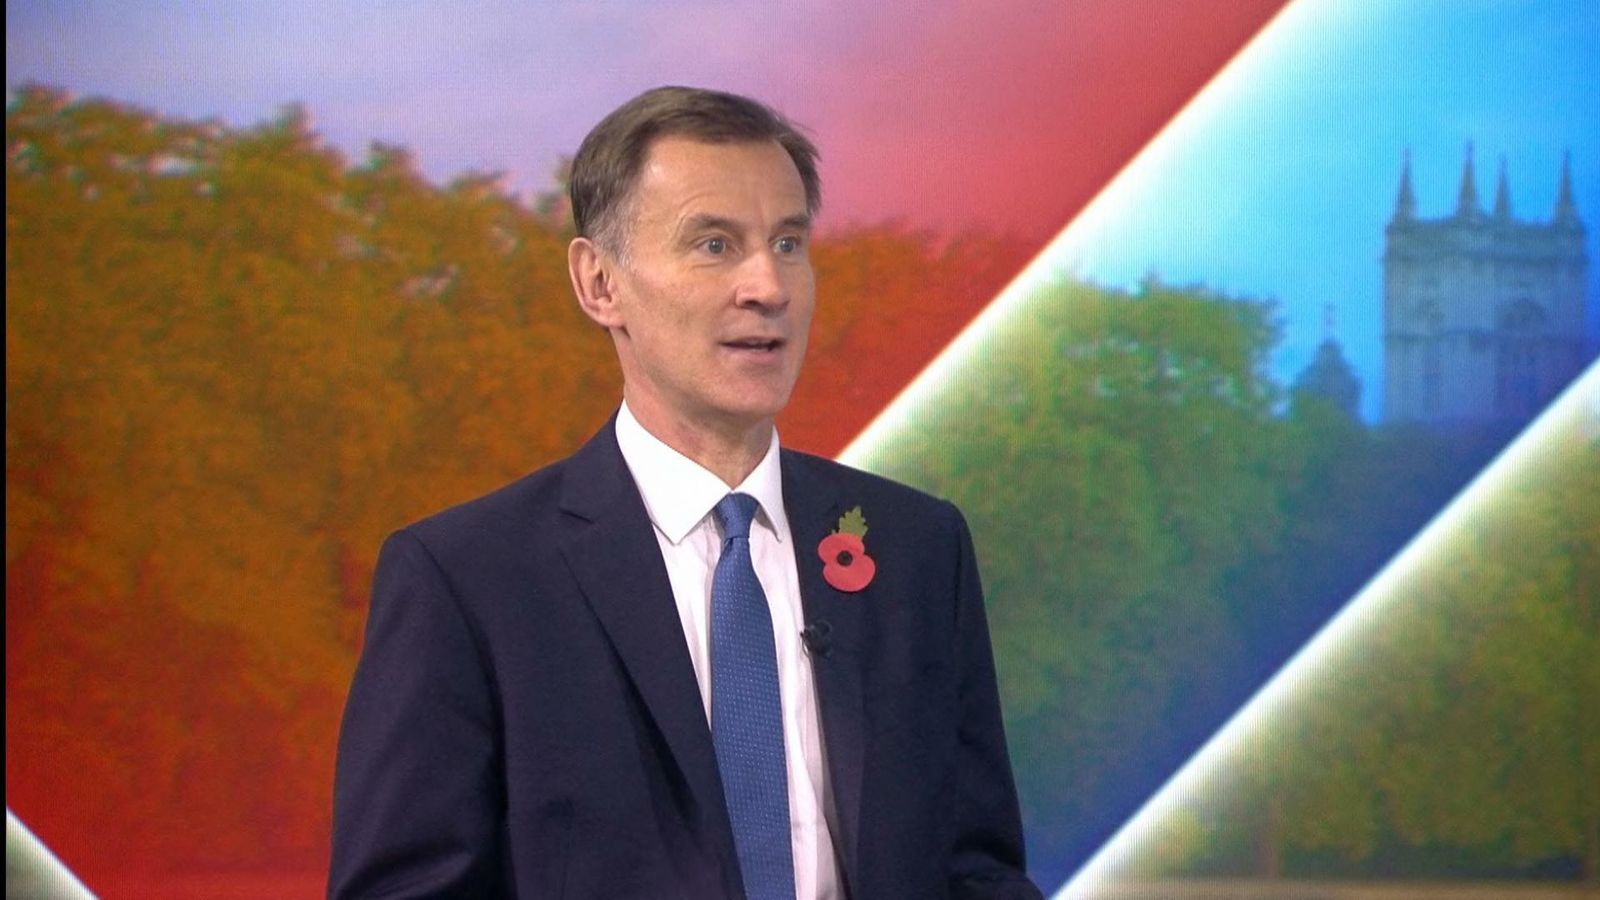 Jeremy Hunt says everyone will have to pay higher taxes - but richest will make larger sacrifices